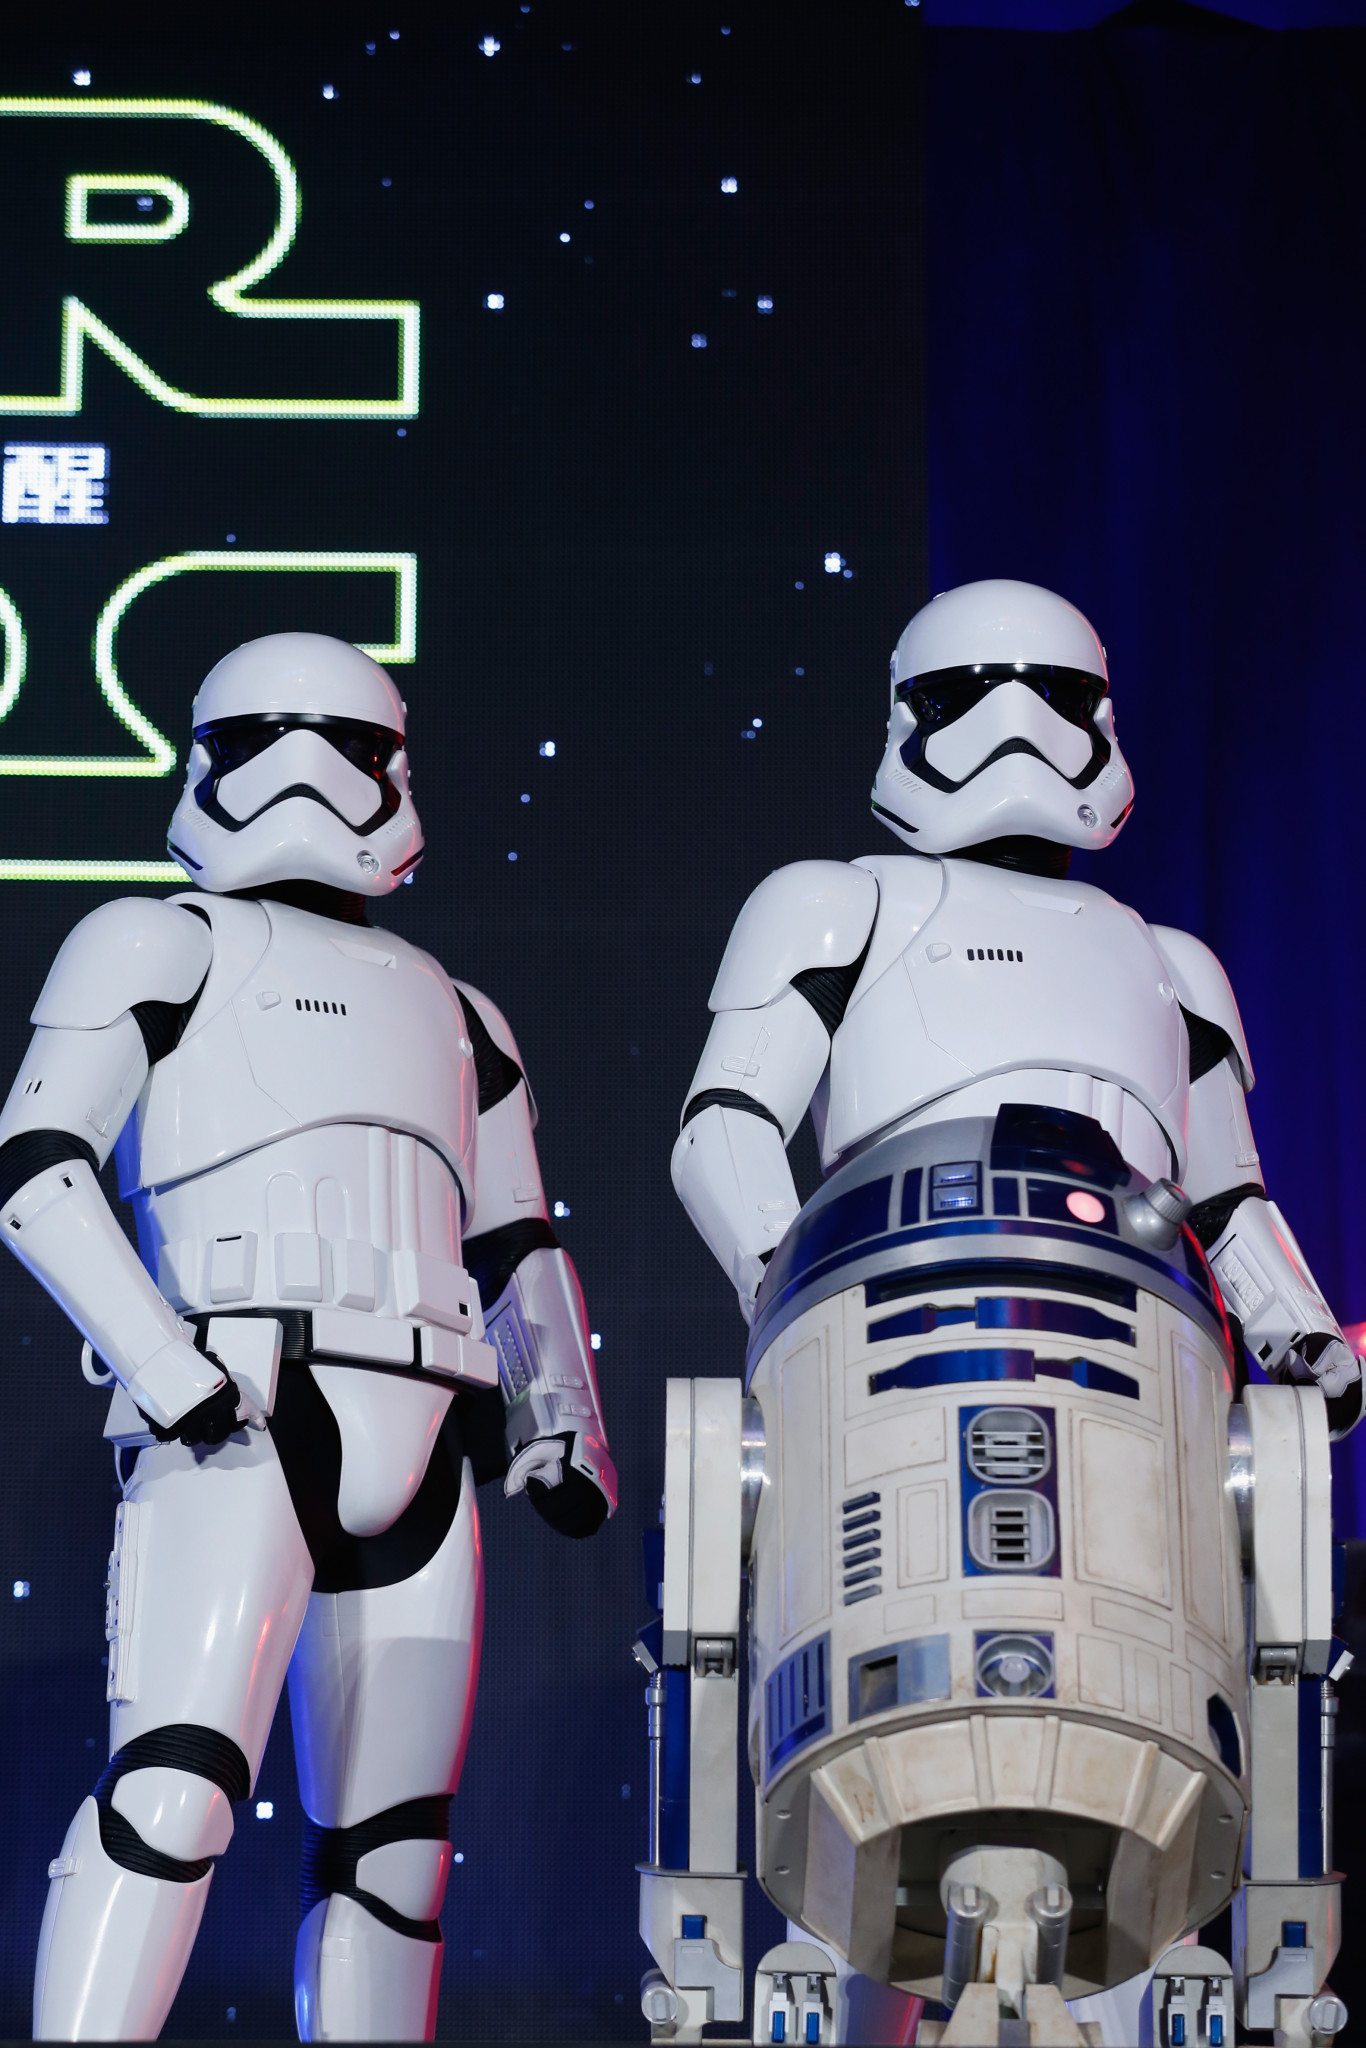 Star Wars: The Force Awakens: Fan Events in Sydney and Tokyo